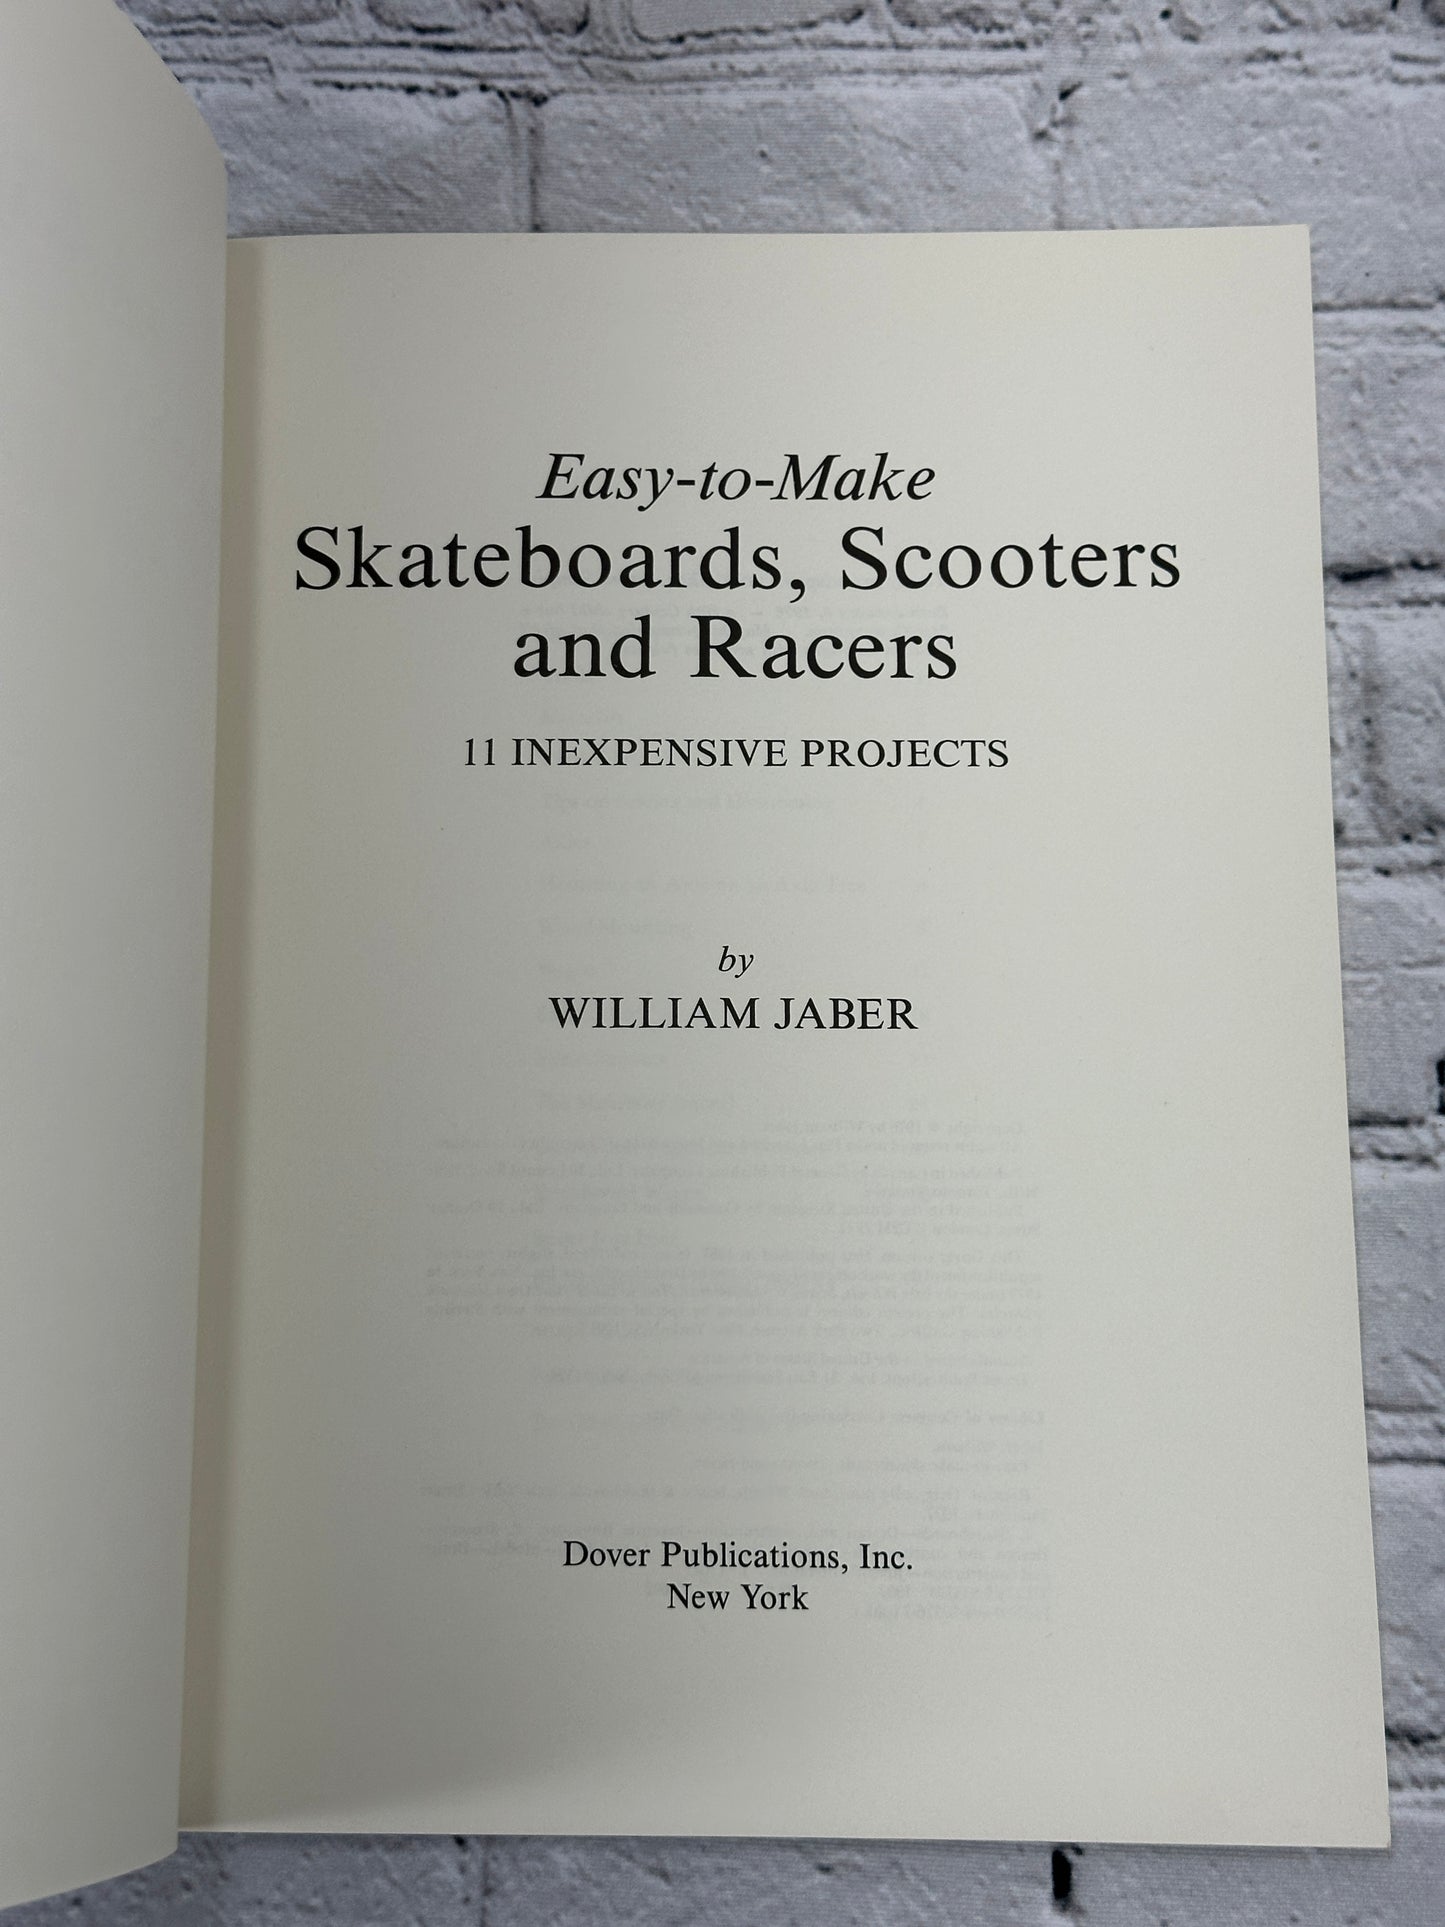 Easy to Make Skateboards, Scooters and Racers By William Jaber  [1976]